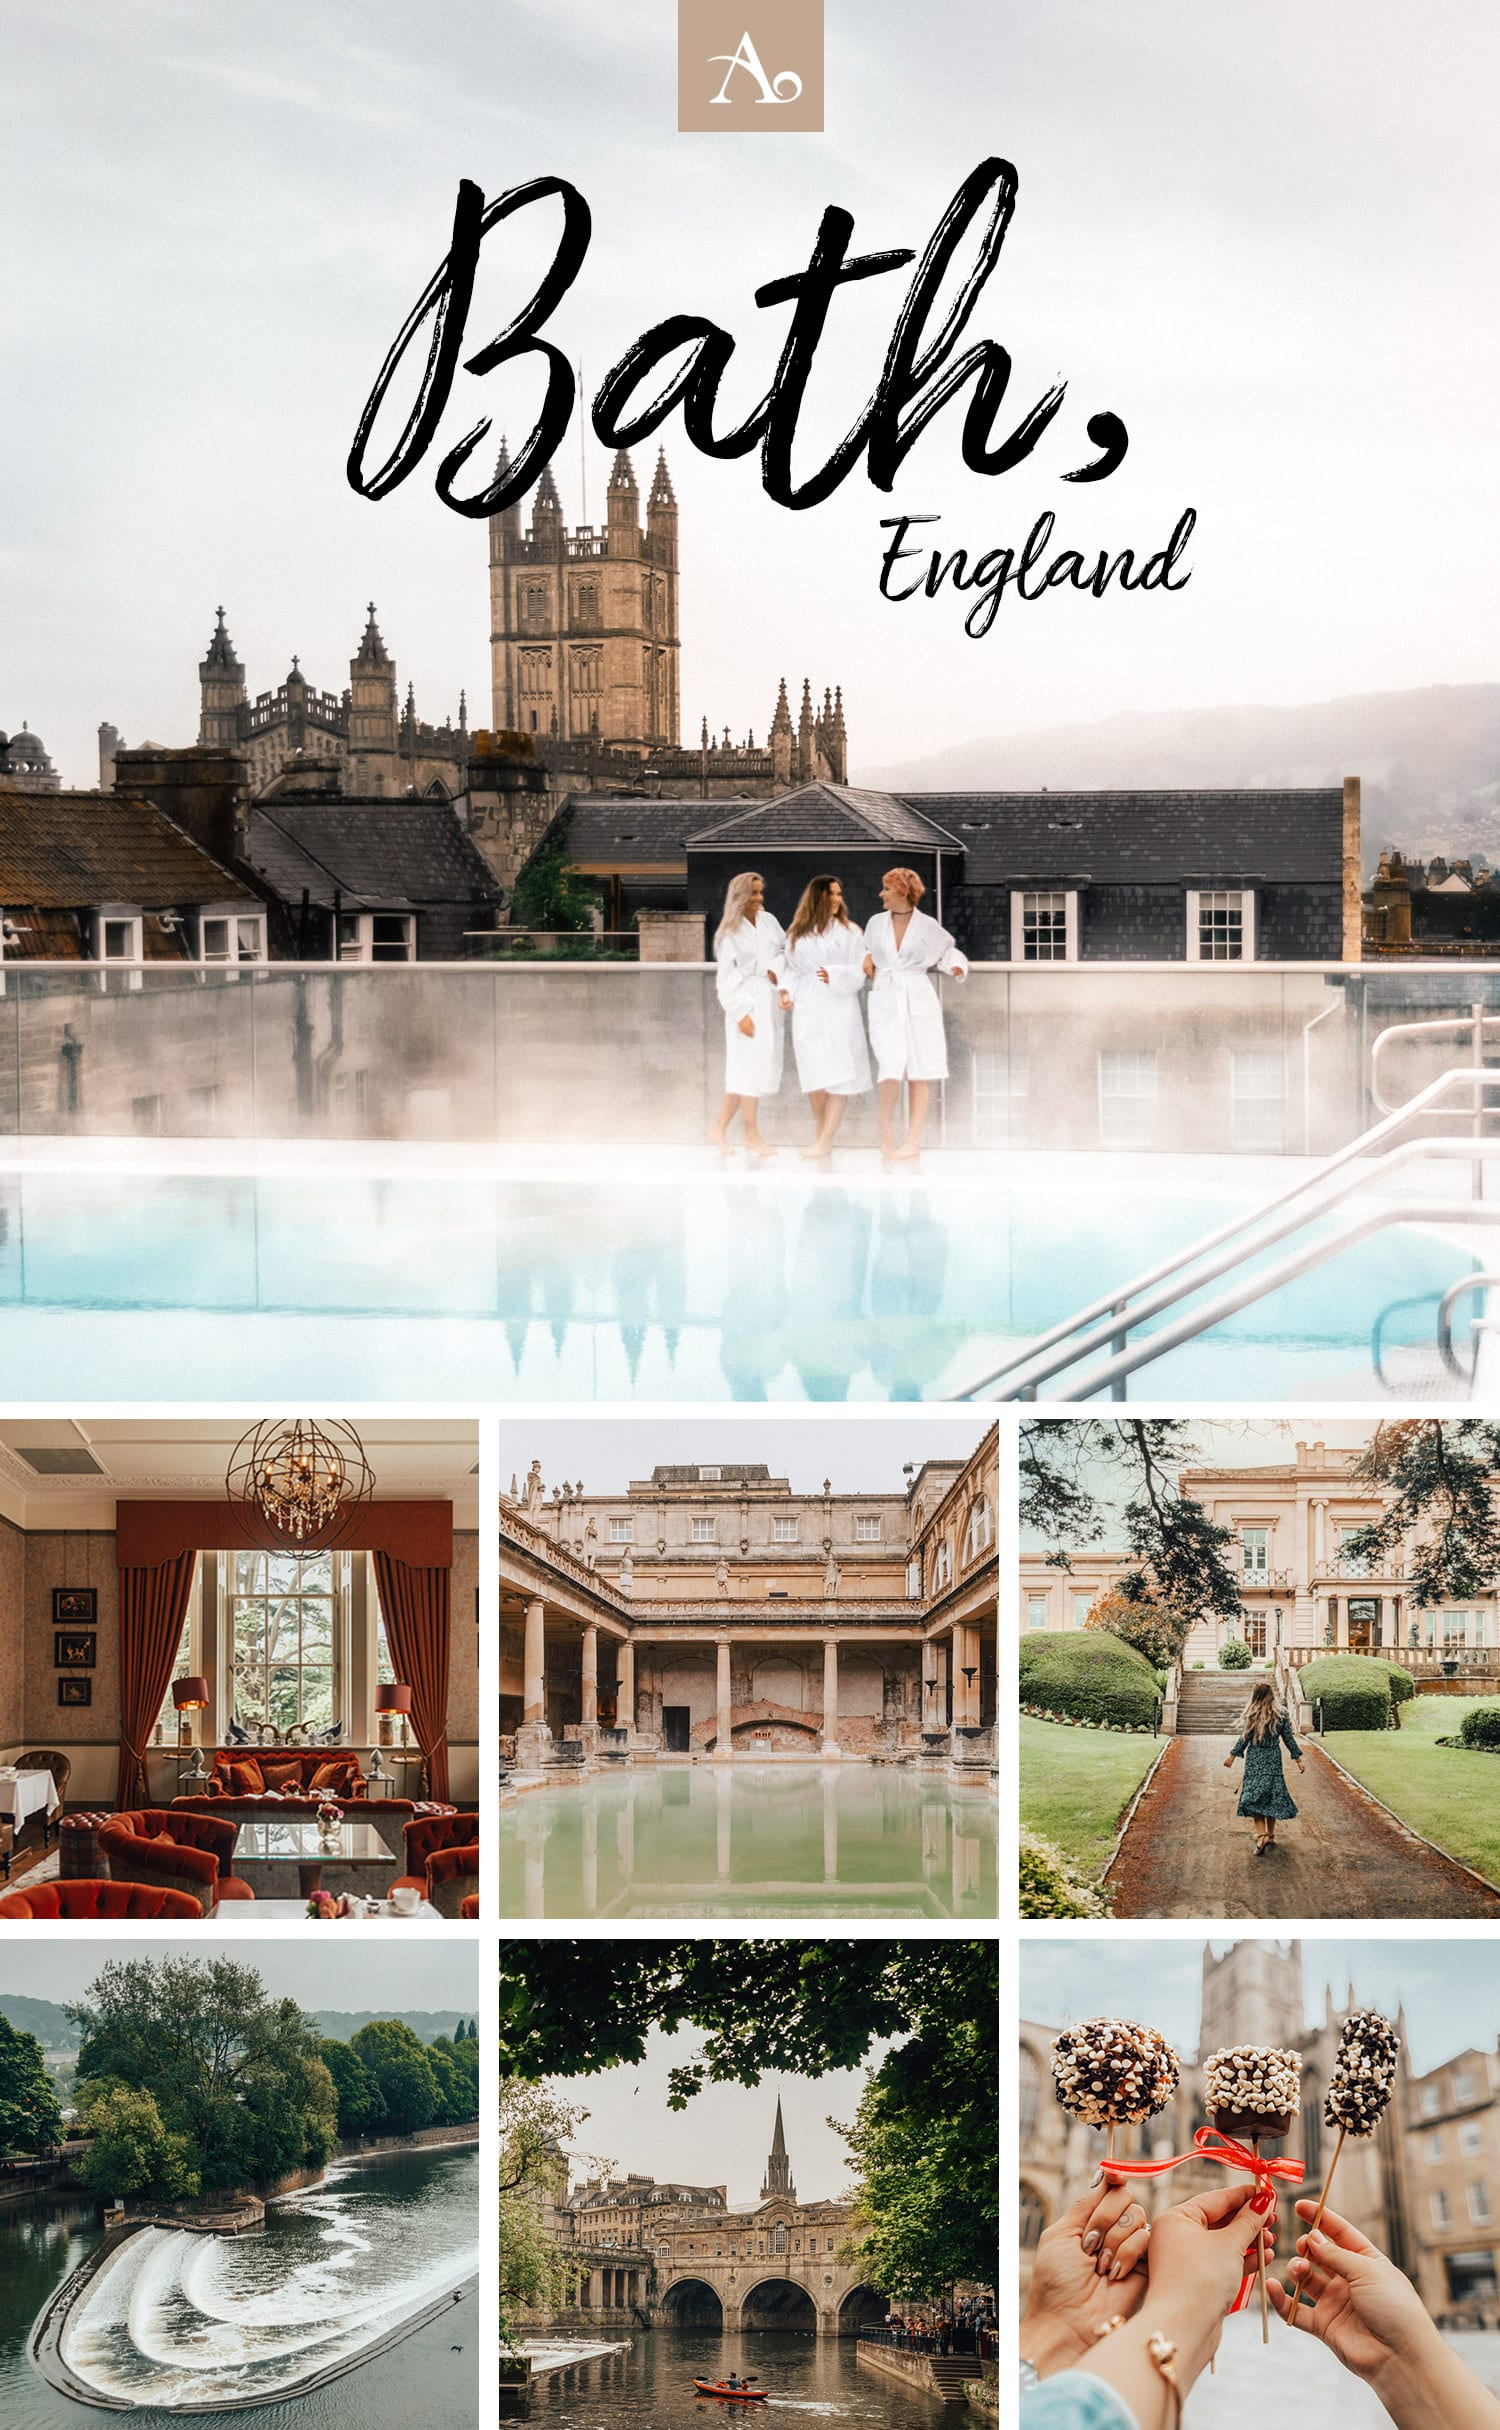 A Weekend in Bath, England - A 48-Hour Itinerary